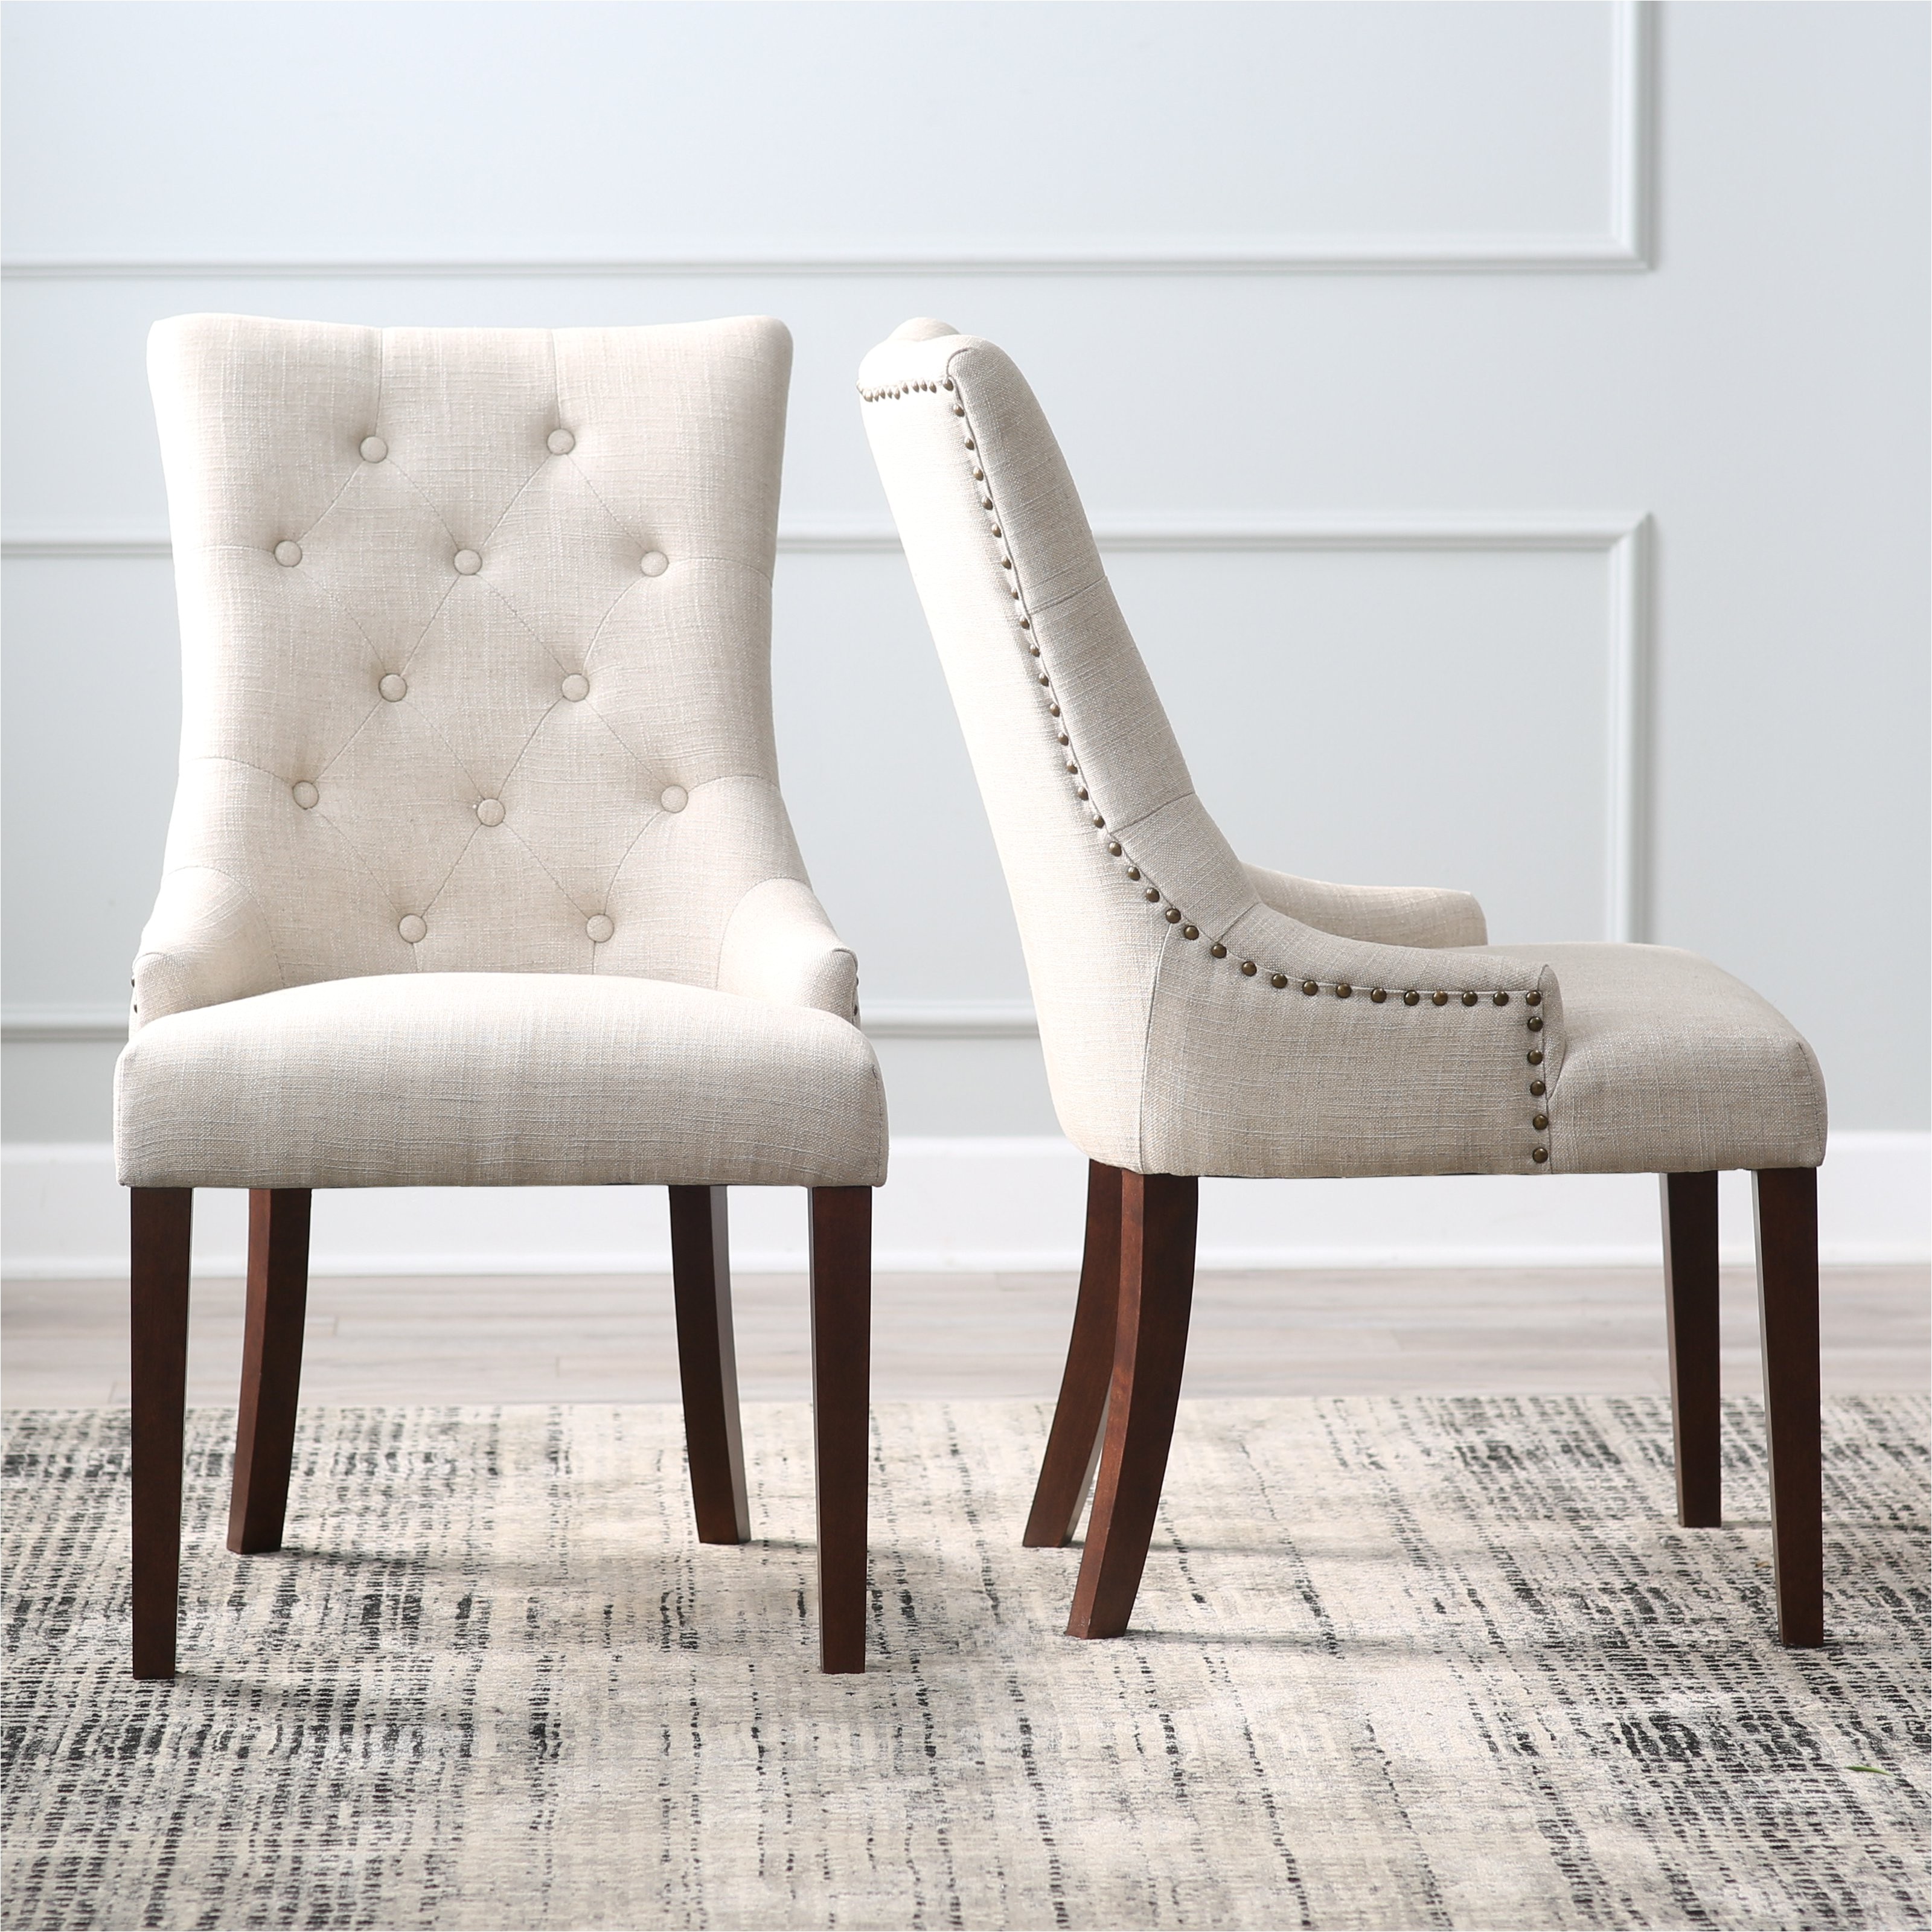 belham living thomas leather tufted tweed dining chairs set of 2 cfm